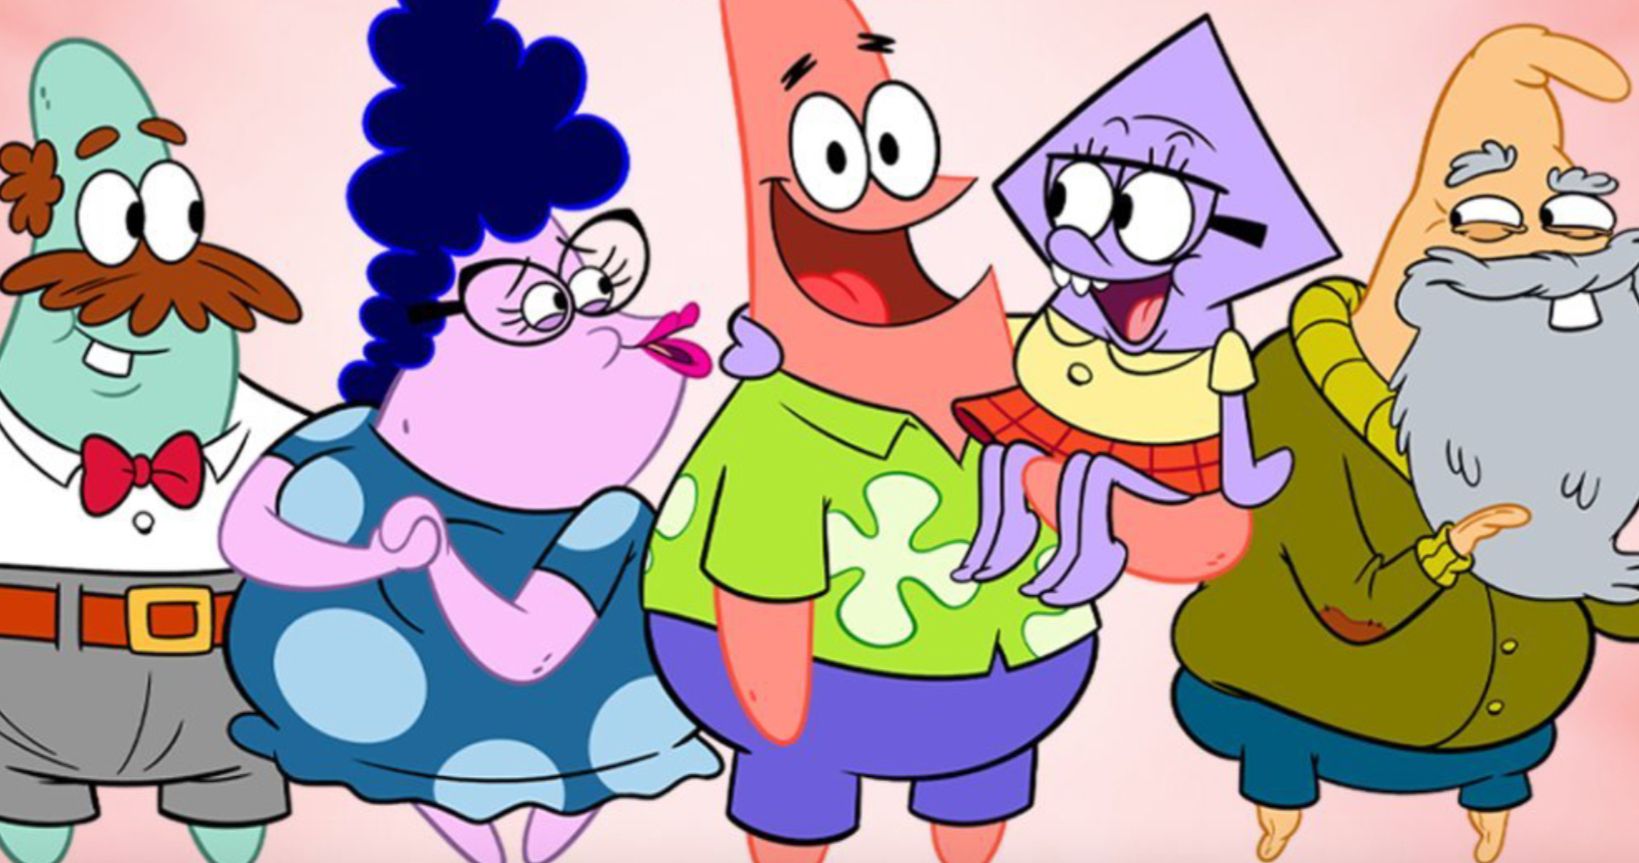 The Patrick Star Show Trailer Reveals First Look at SpongeBob Spinoff Series